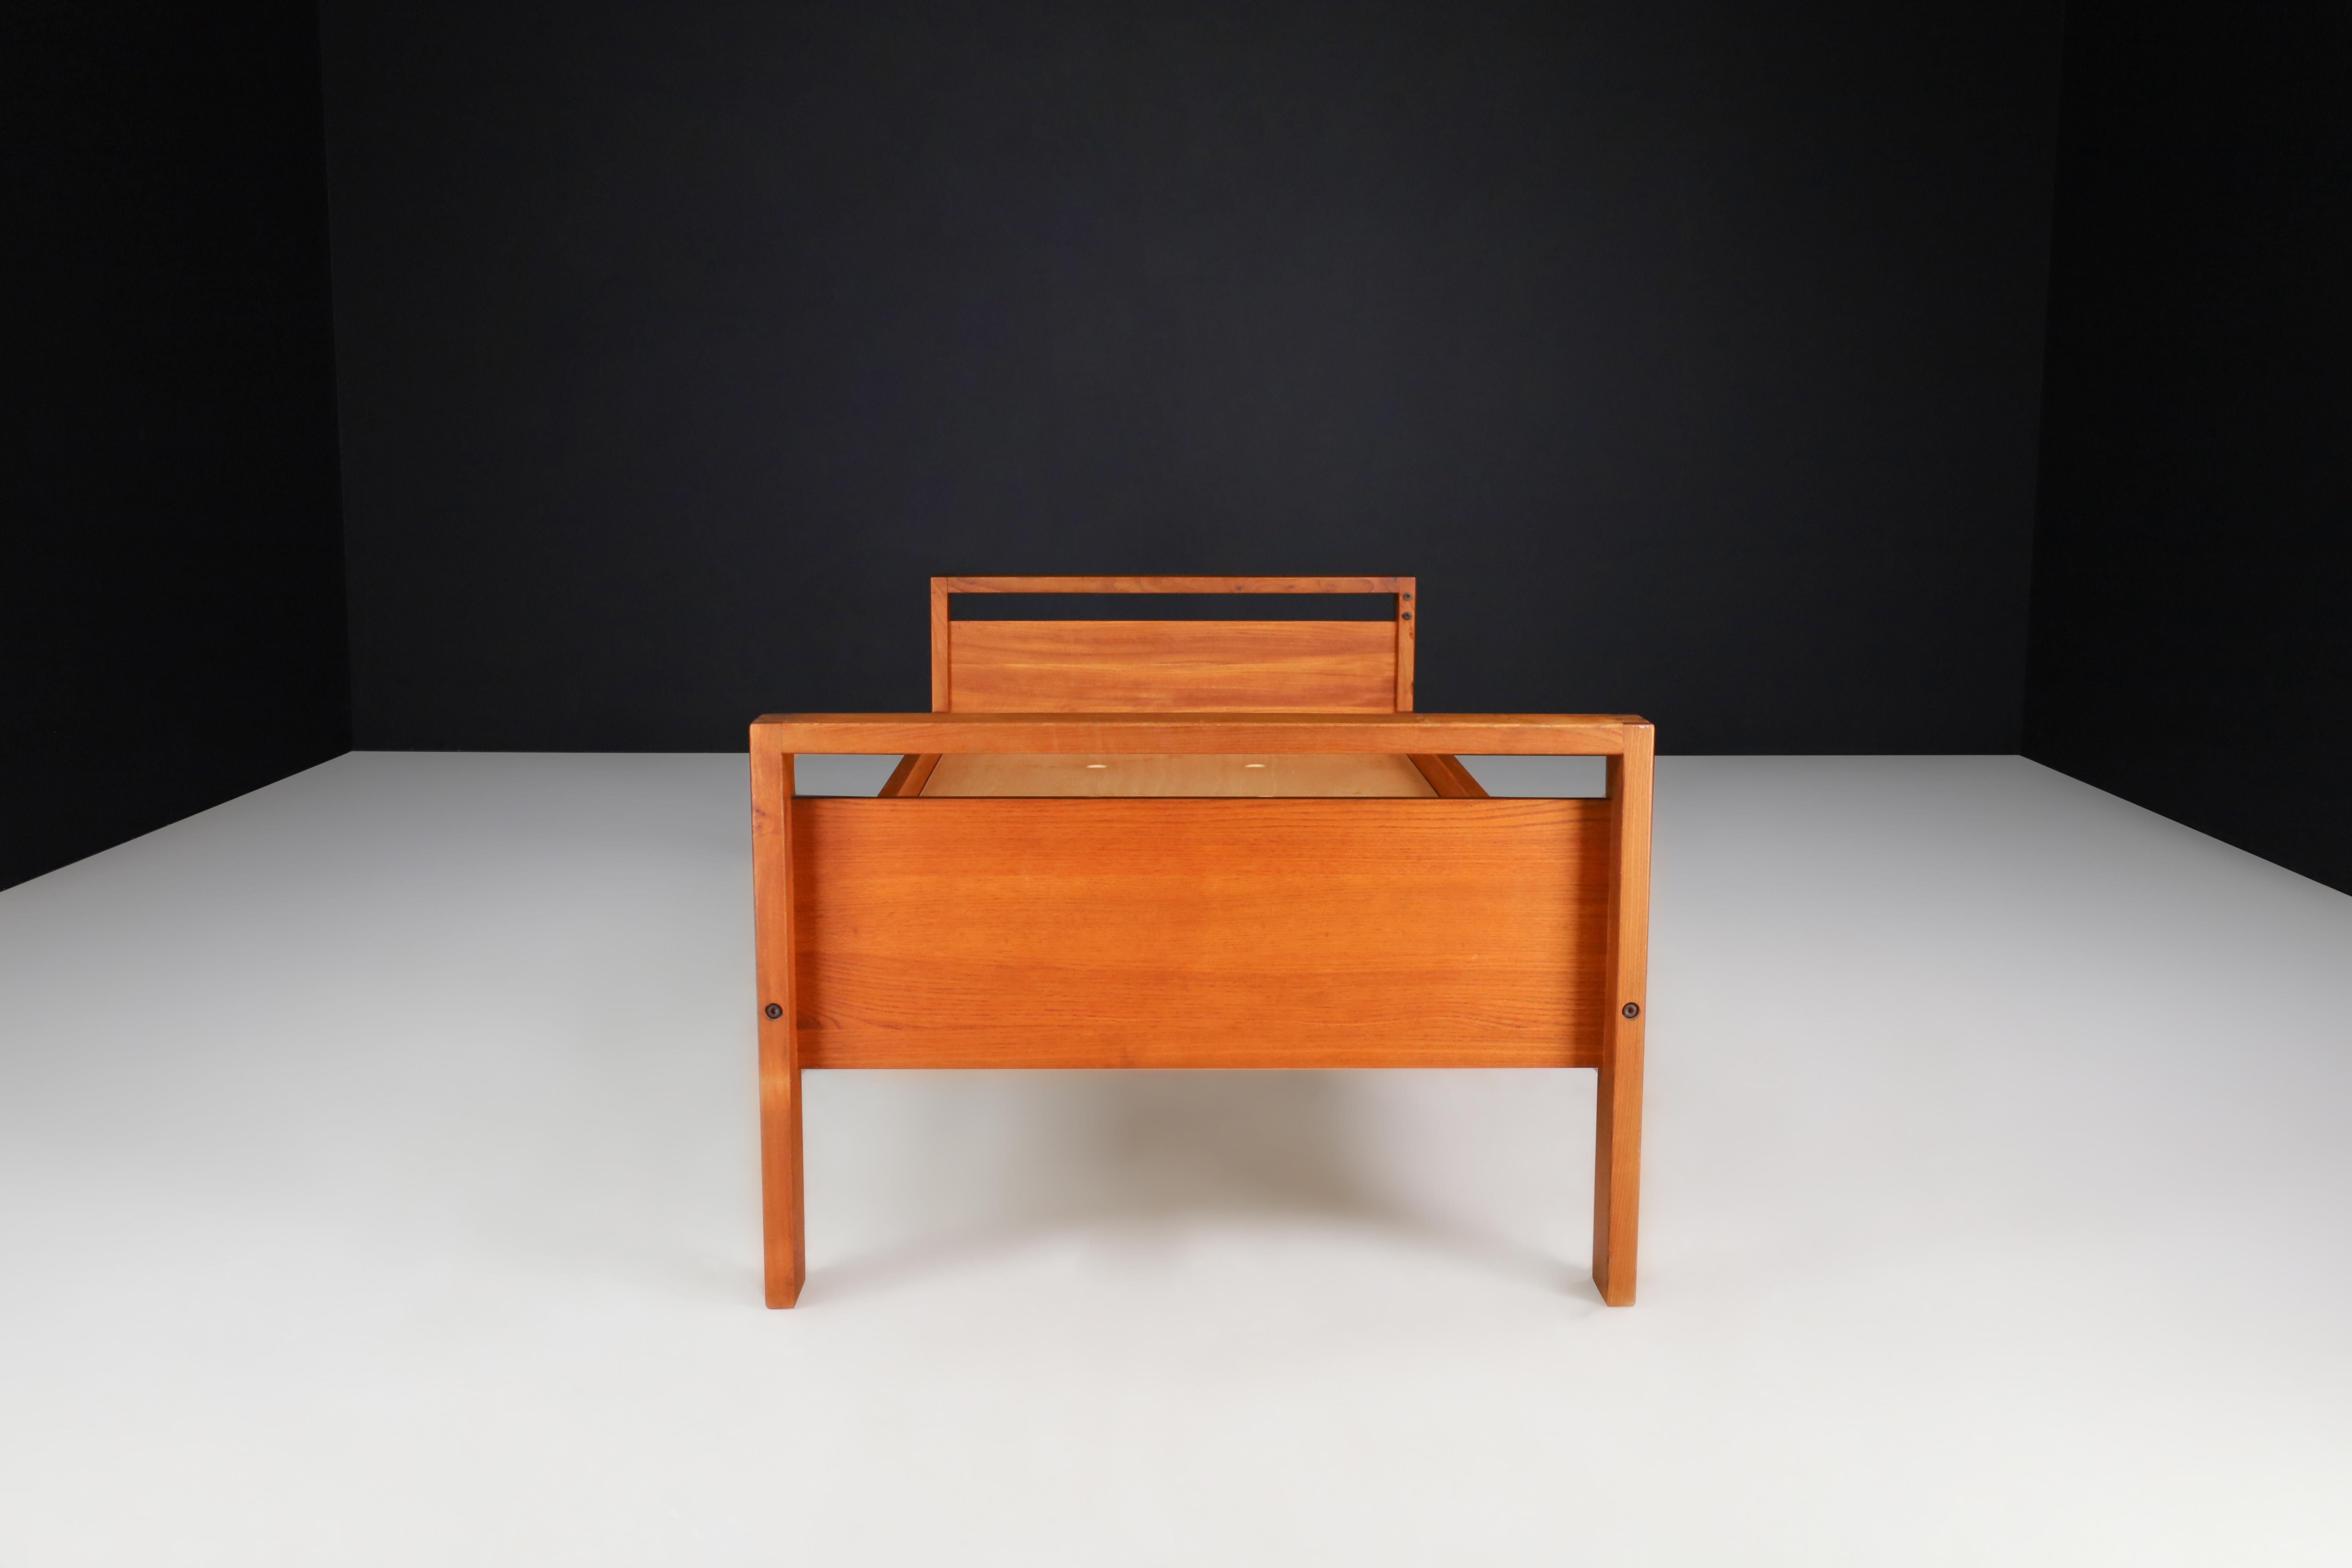 Midcentury Pierre Chapo Lo6a Bed, Daybed in Solid Elm Wood, France, 1960s For Sale 3